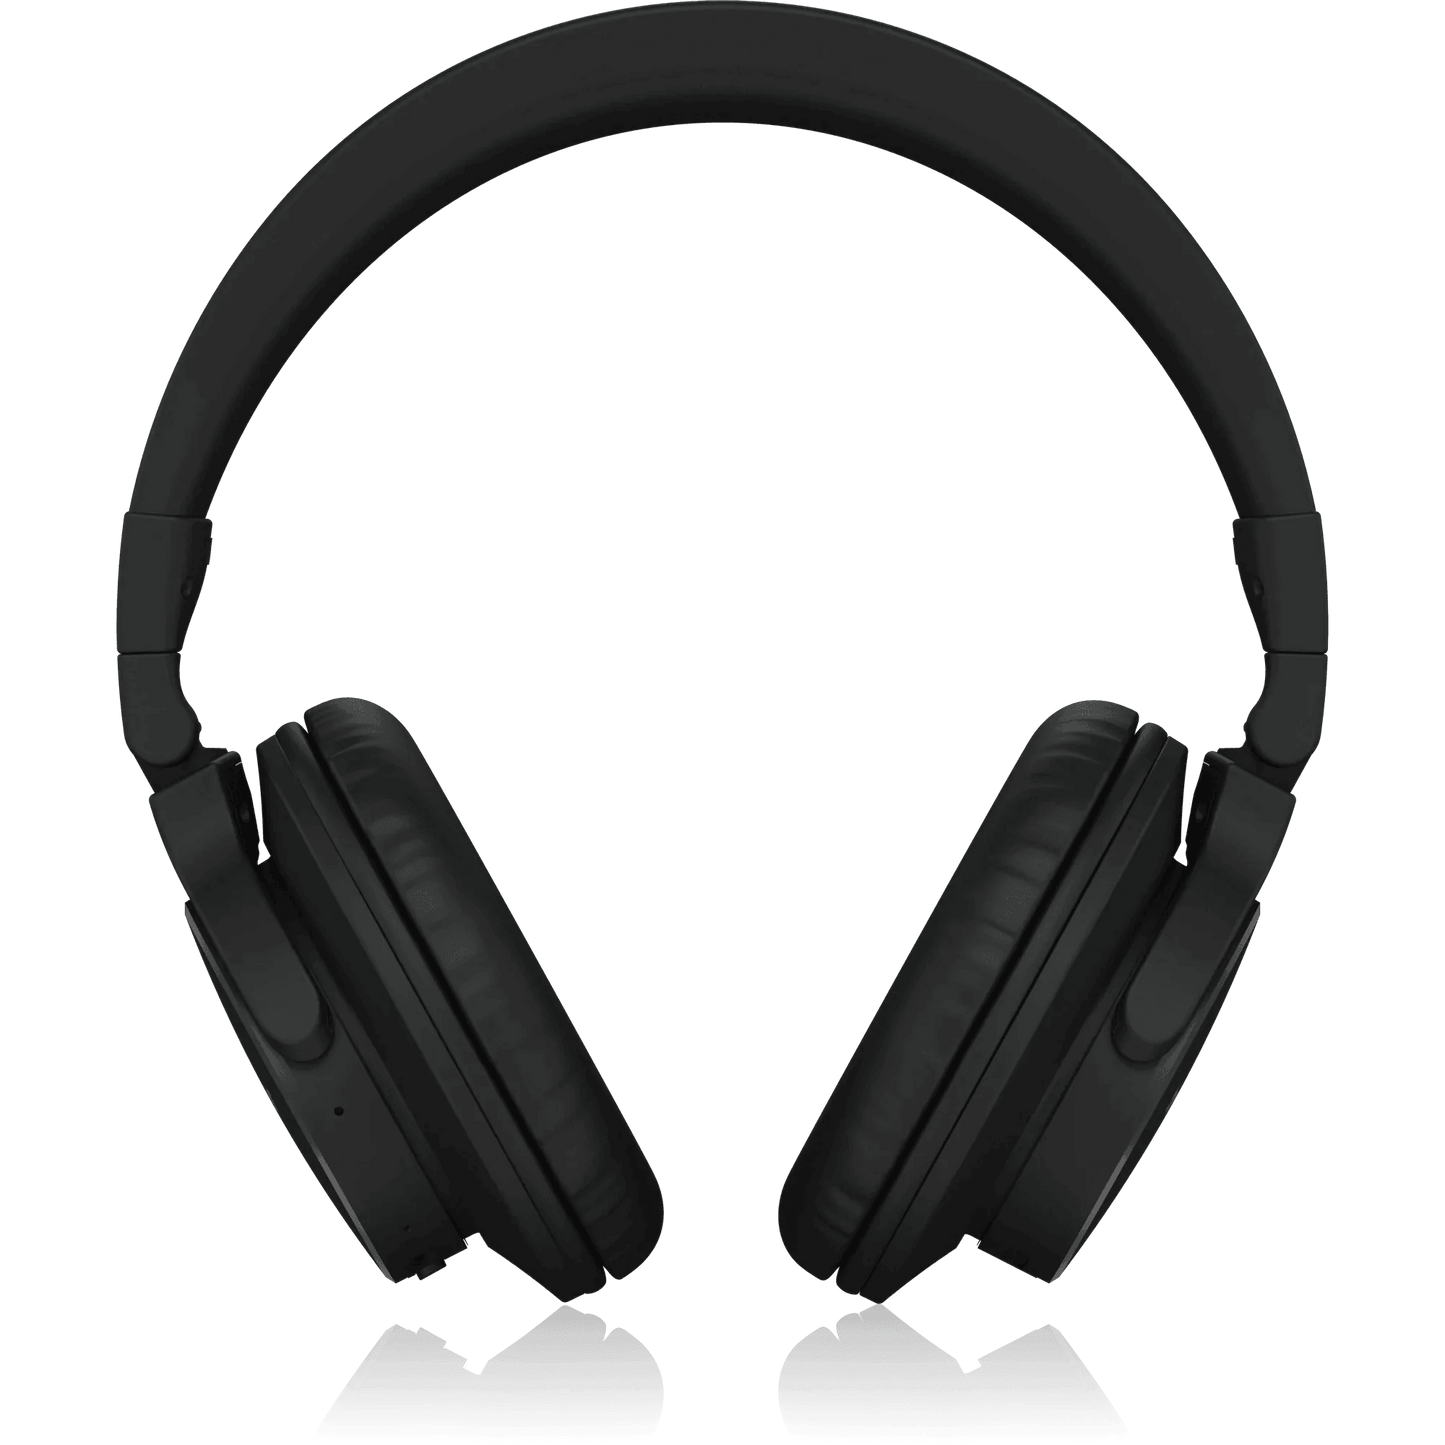 Behringer BH480NC Headphones with Bluetooth Connectivity and Active Noise Cancellation